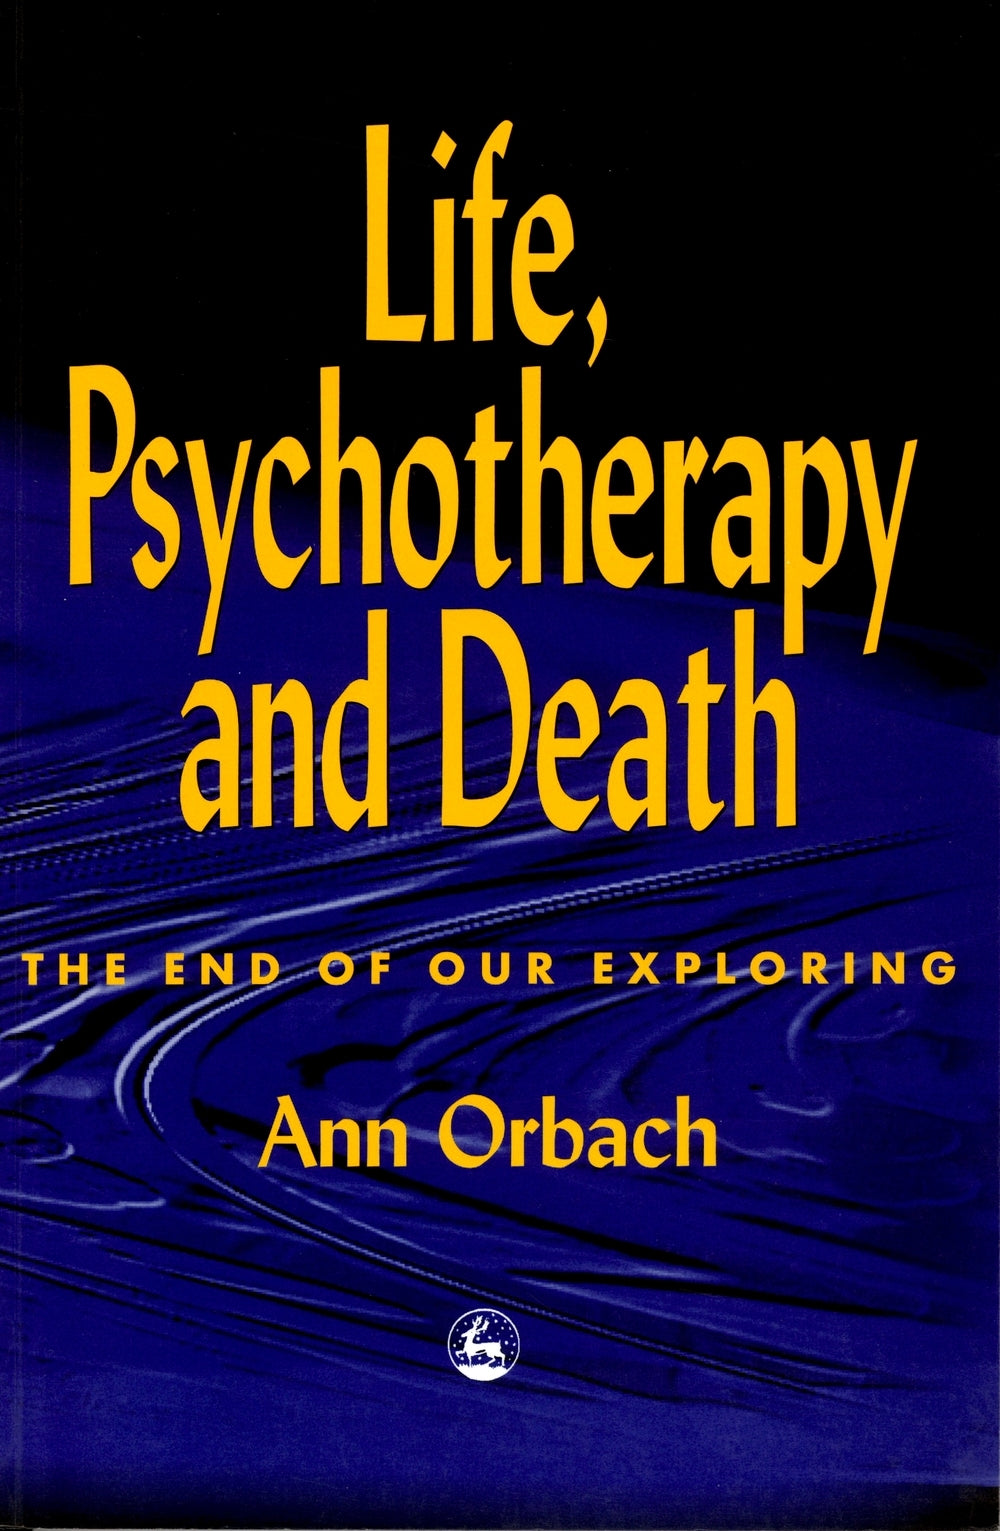 Life, Psychotherapy and Death by Ann Orbach